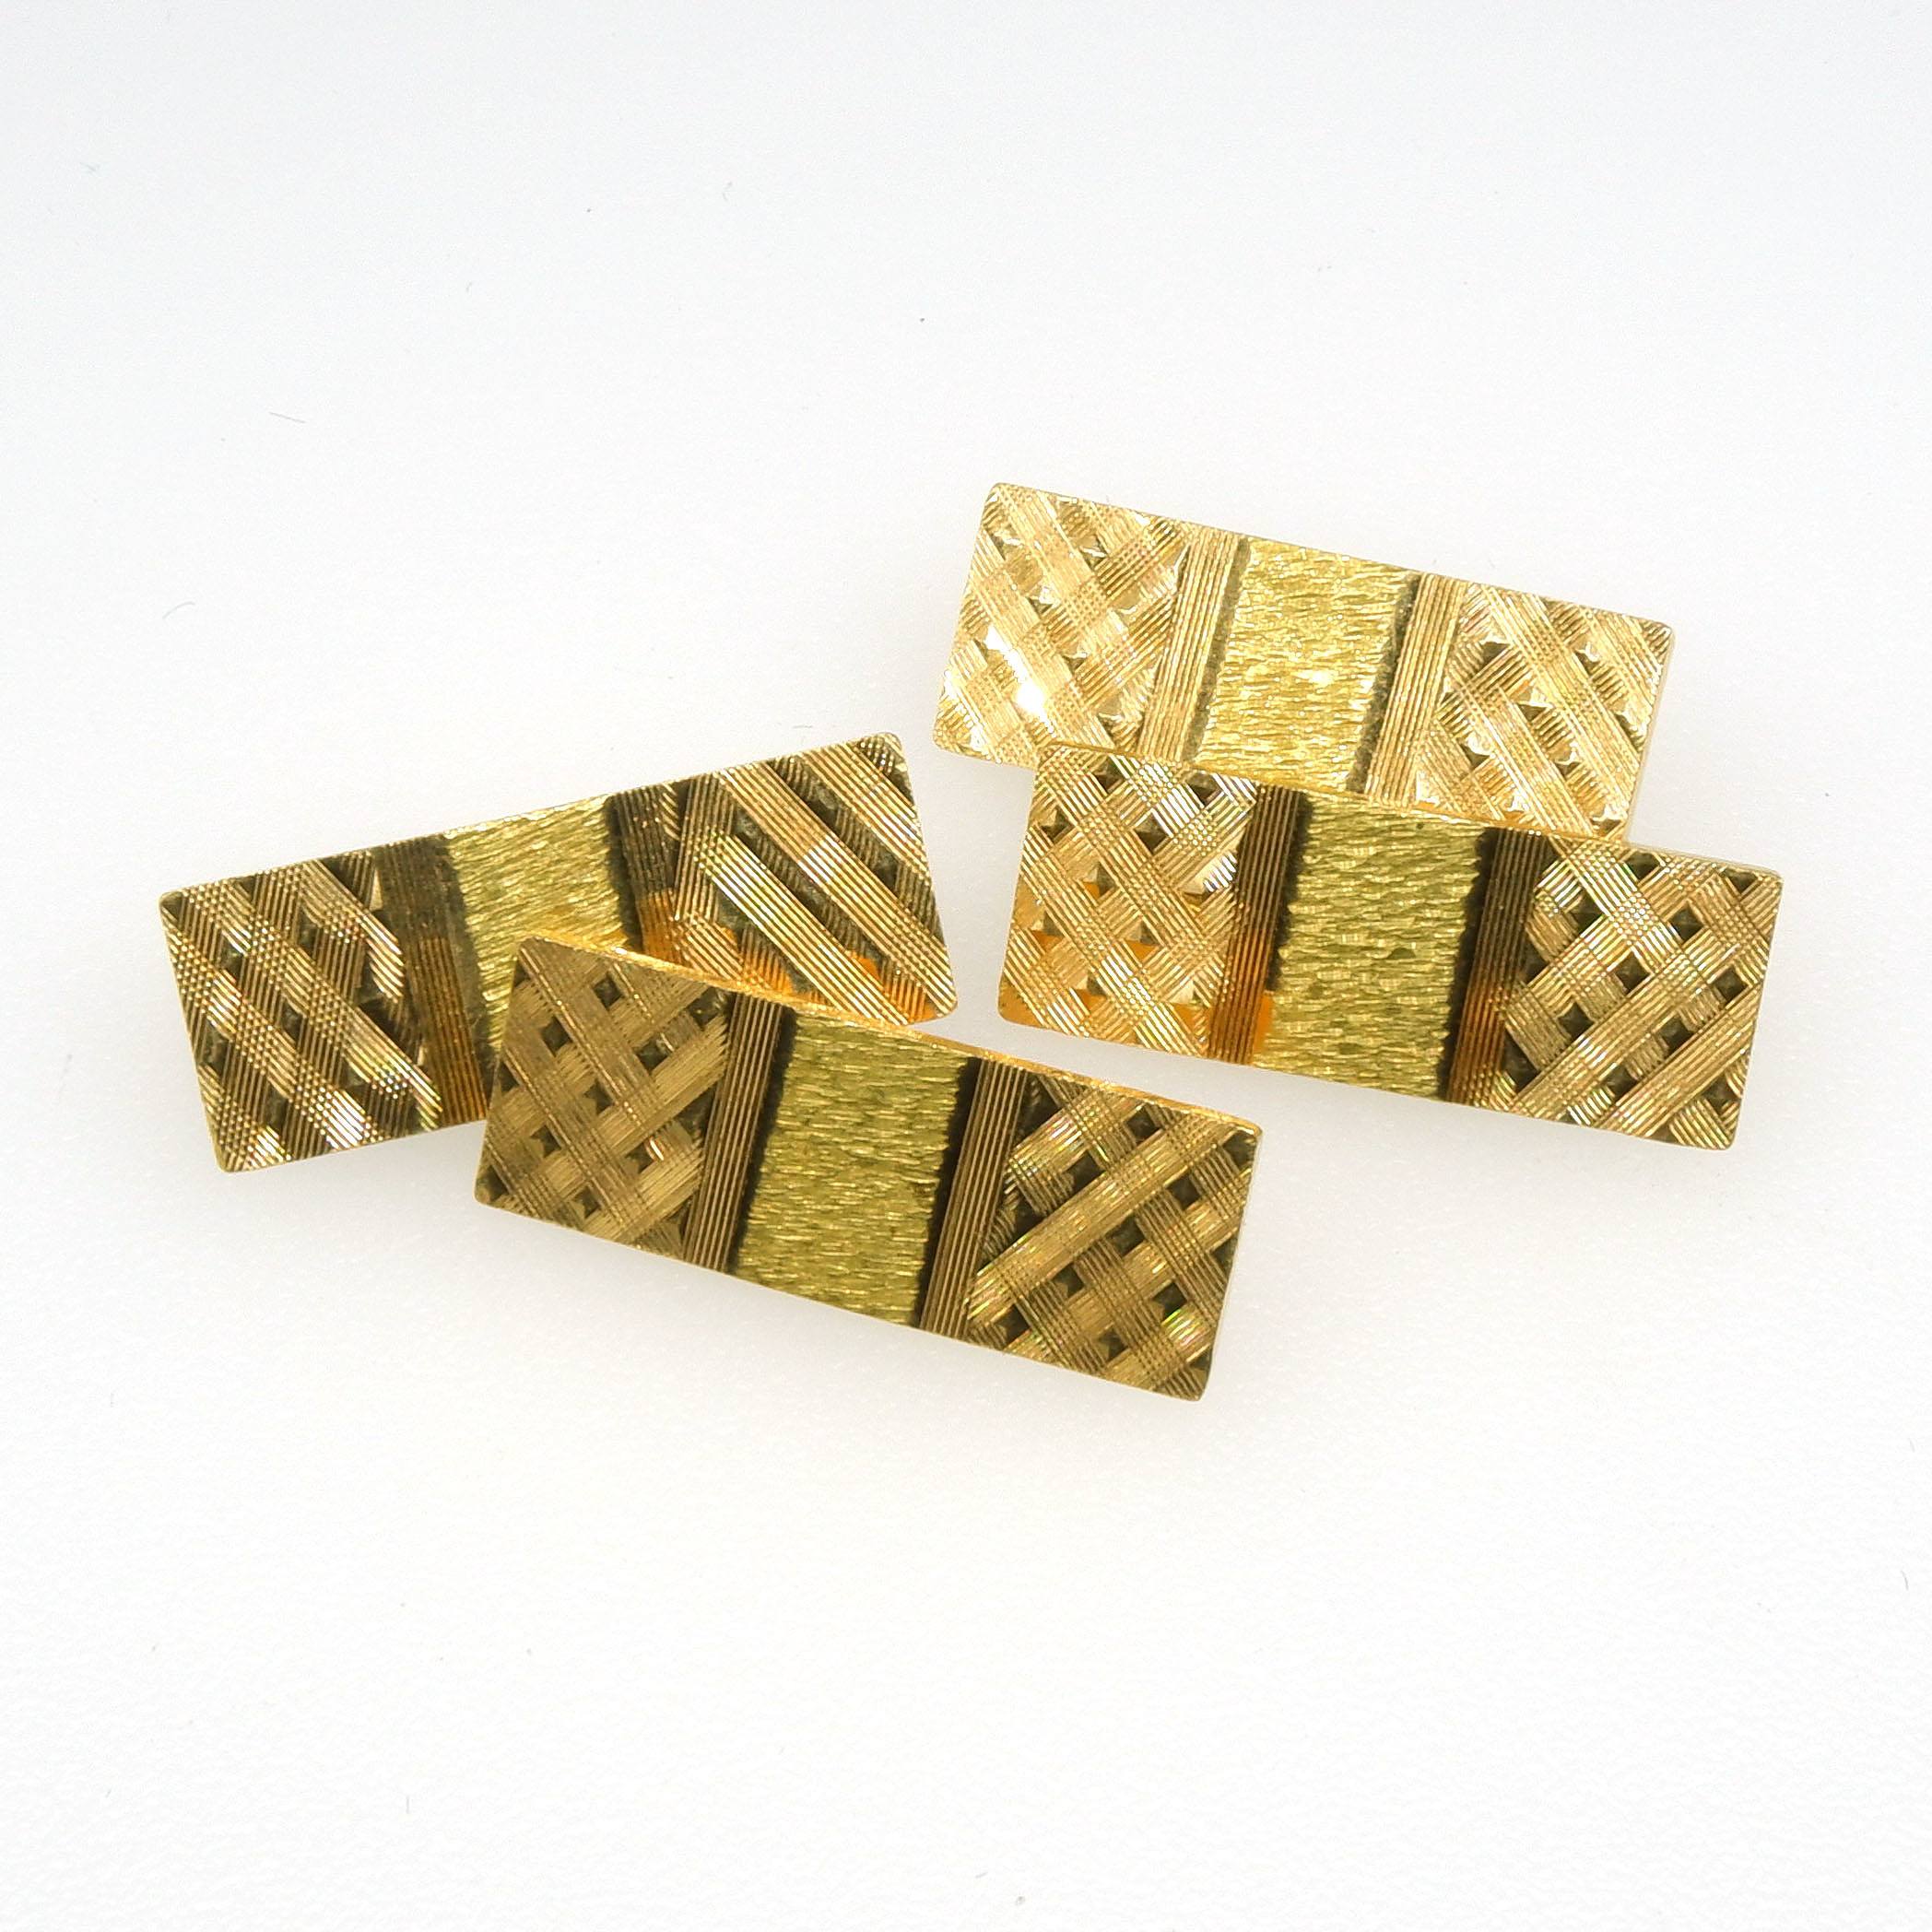 'European 18ct Yellow Gold Rectangular Plate Two Tone Double Sided Cufflinks with Patterned Finish Circa 1960s'